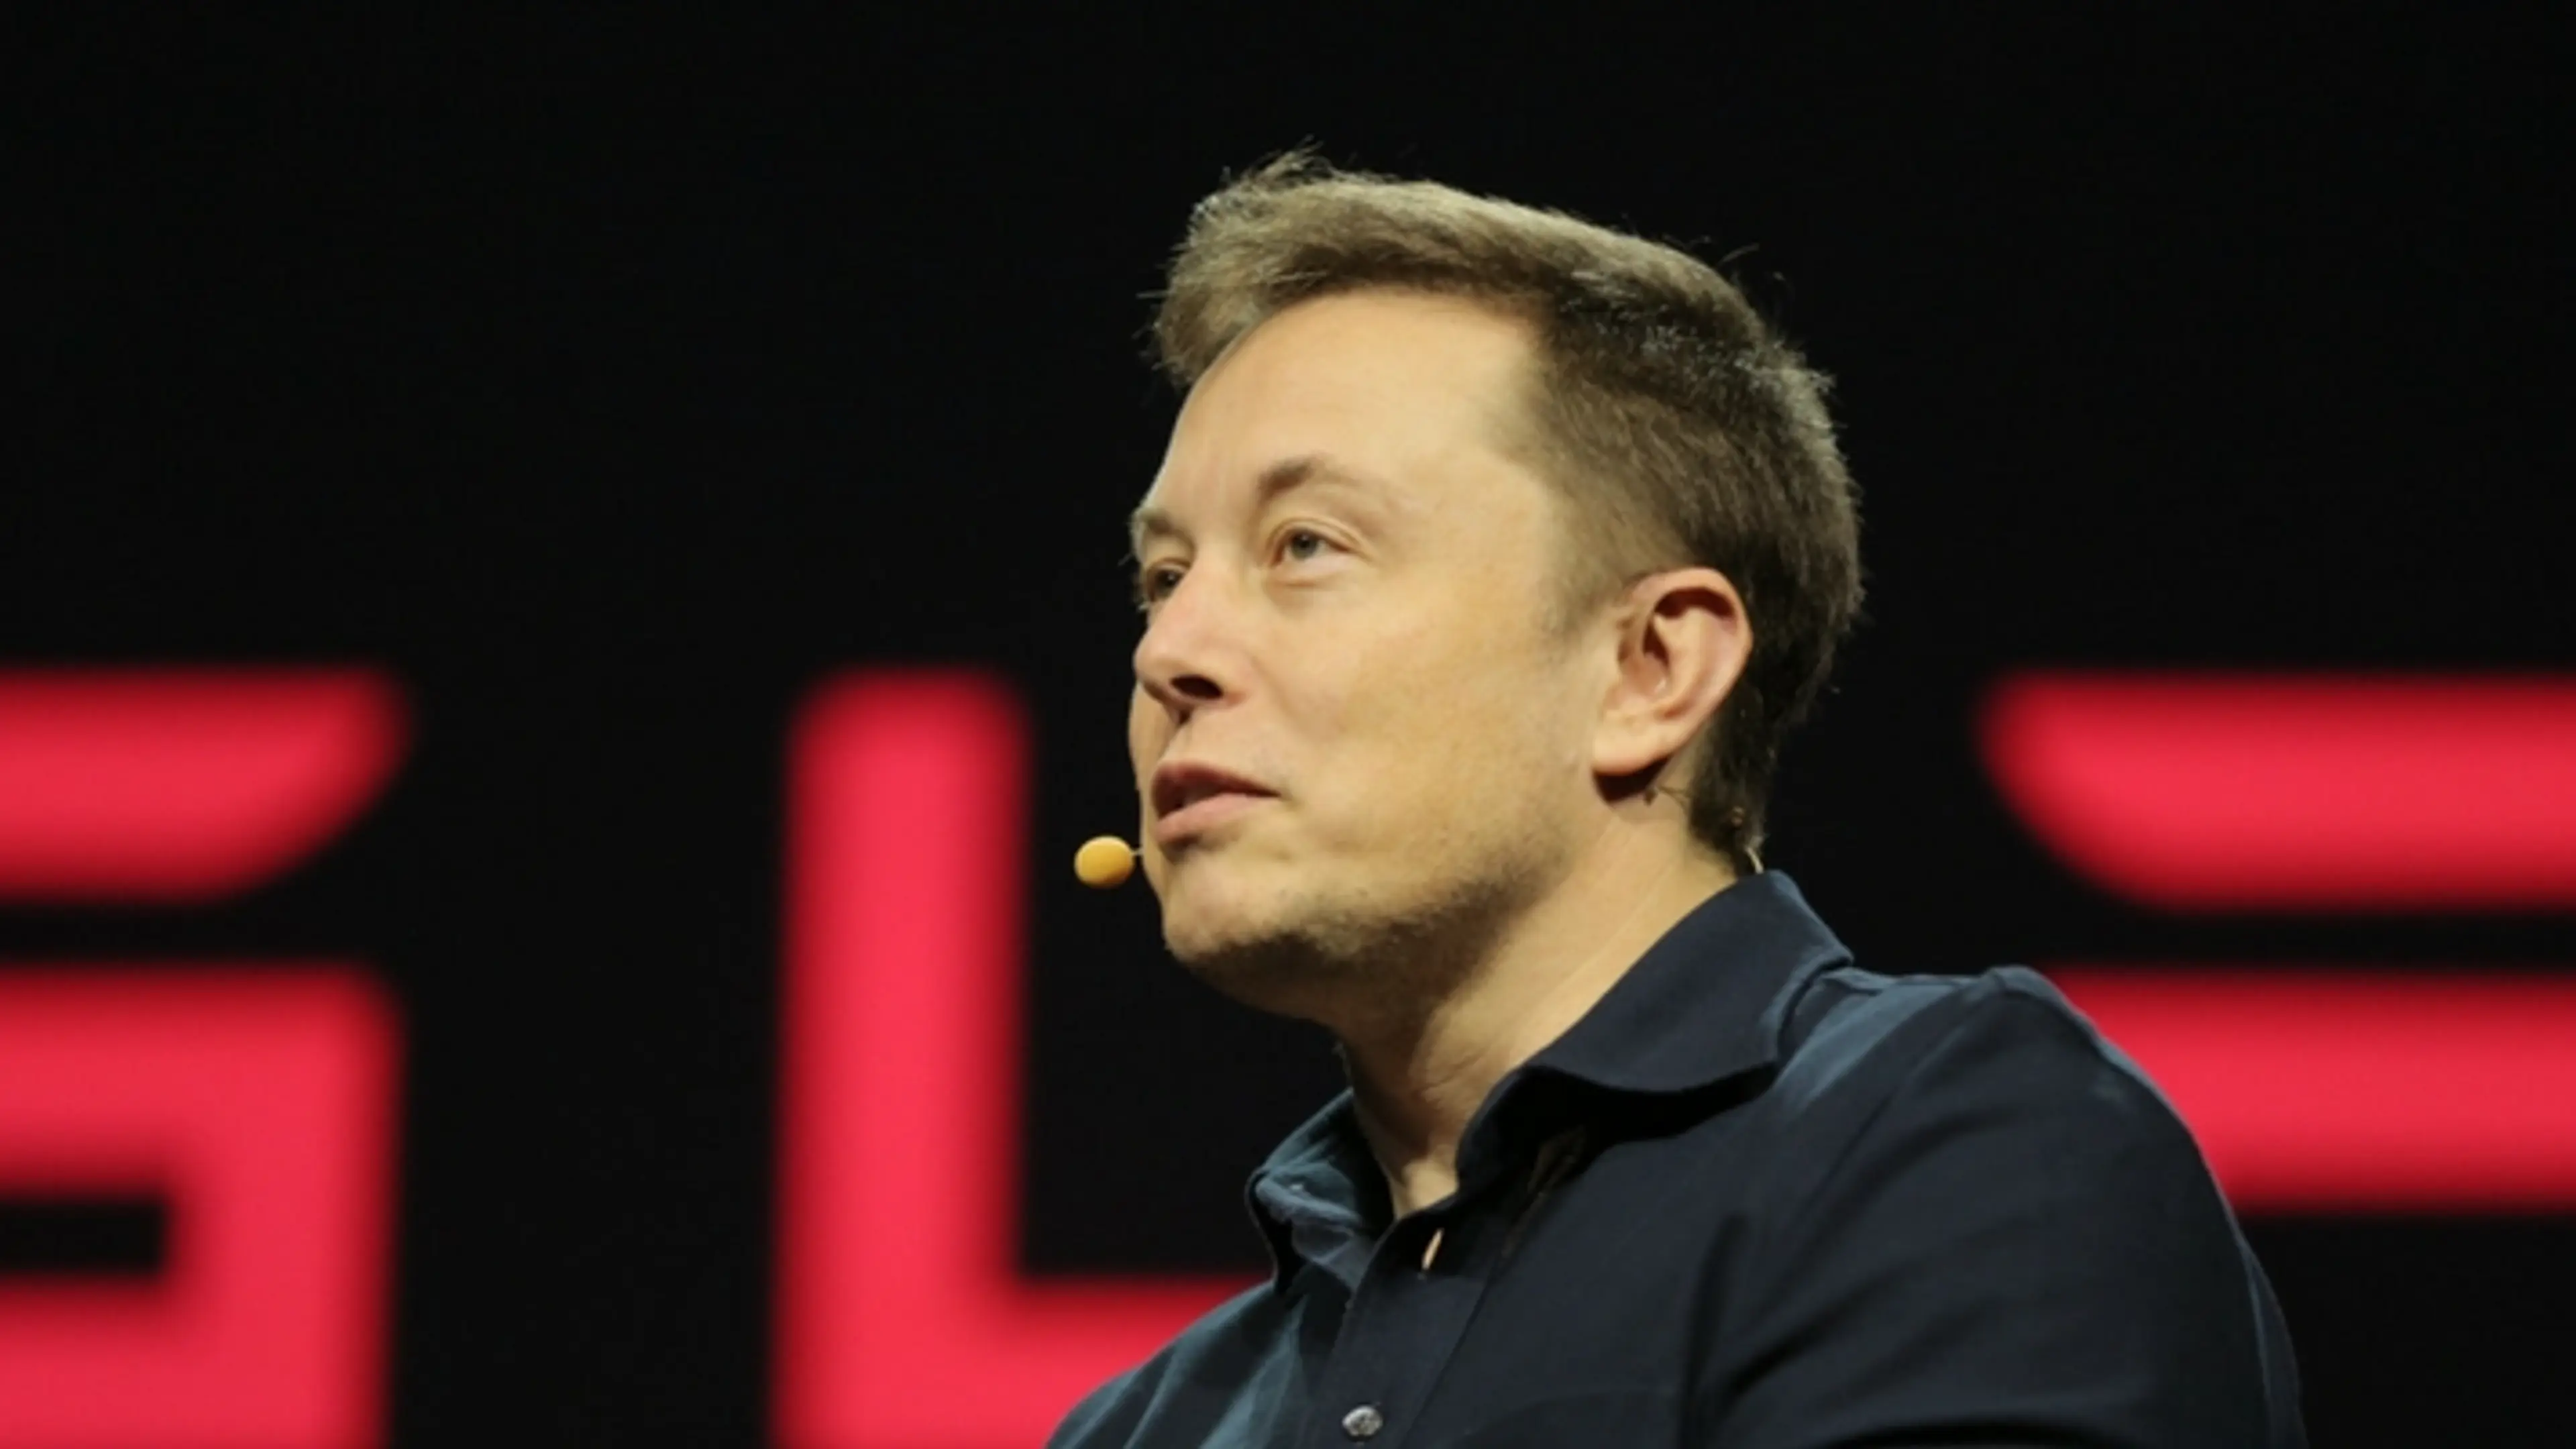 Elon Musk looks forward to doing 'exciting work' in India as he congratulates Modi on his election win